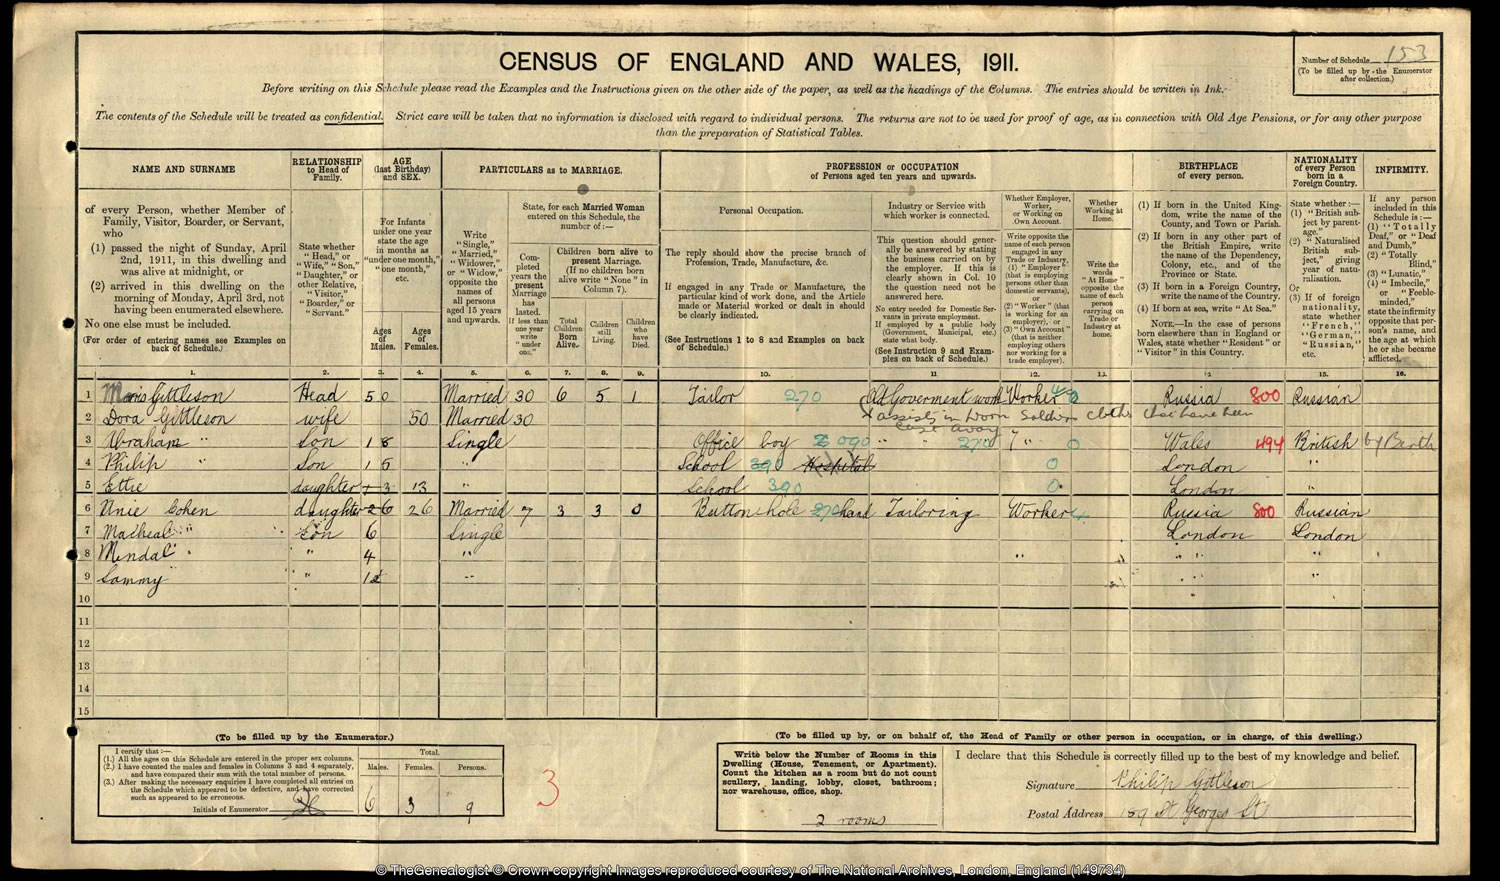 1911 census on TheGenealogist for Alex's family reveals 9 people in 2 rooms